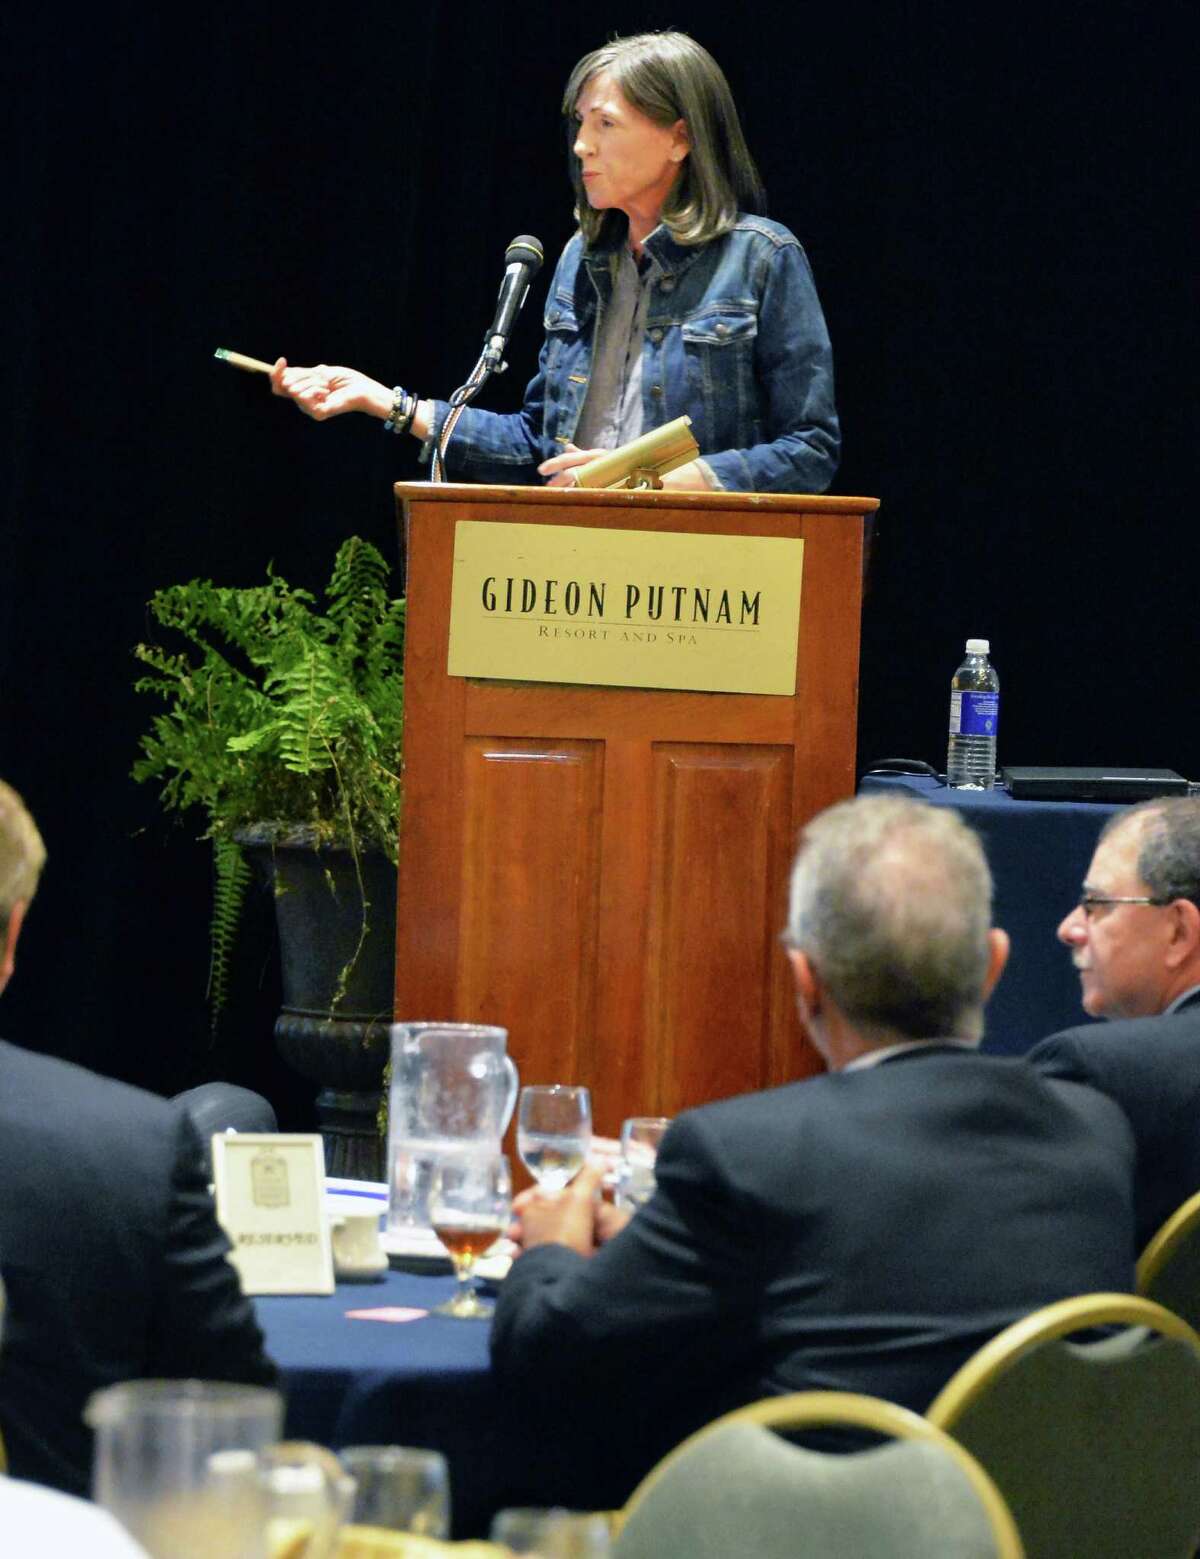 Former Clinton EPA head, Carol M. Browner, now a member of the Leadership Council of Nuclear Matters, addresses the Independent Power Producers of New York's Annual Fall Conference at the Gideon Putnam Resort Tuesday. Sept. 9, 2014, in Saratoga Springs, N.Y. (John Carl D'Annibale / Times Union)